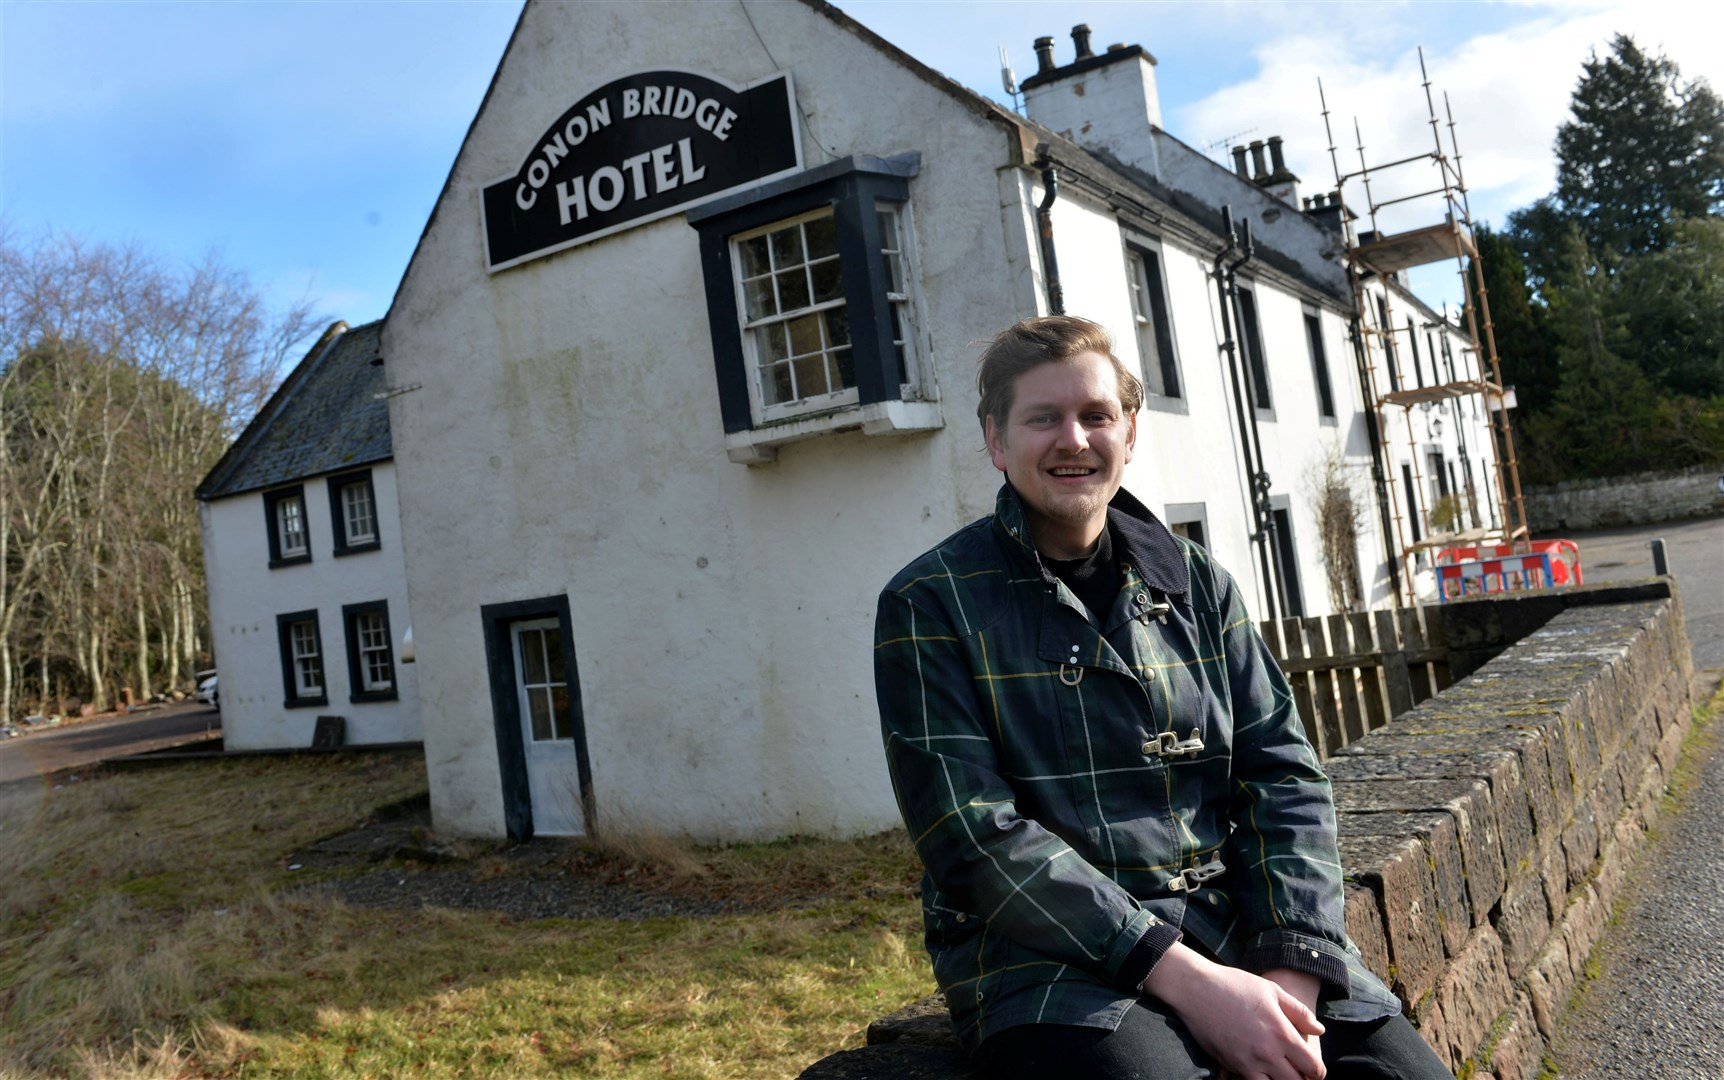 Conon Bridge Hotel owner David Whiteford sees a bright future for the building and says he is prepared to put in the graft to get there. Picture: Callum Mackay.